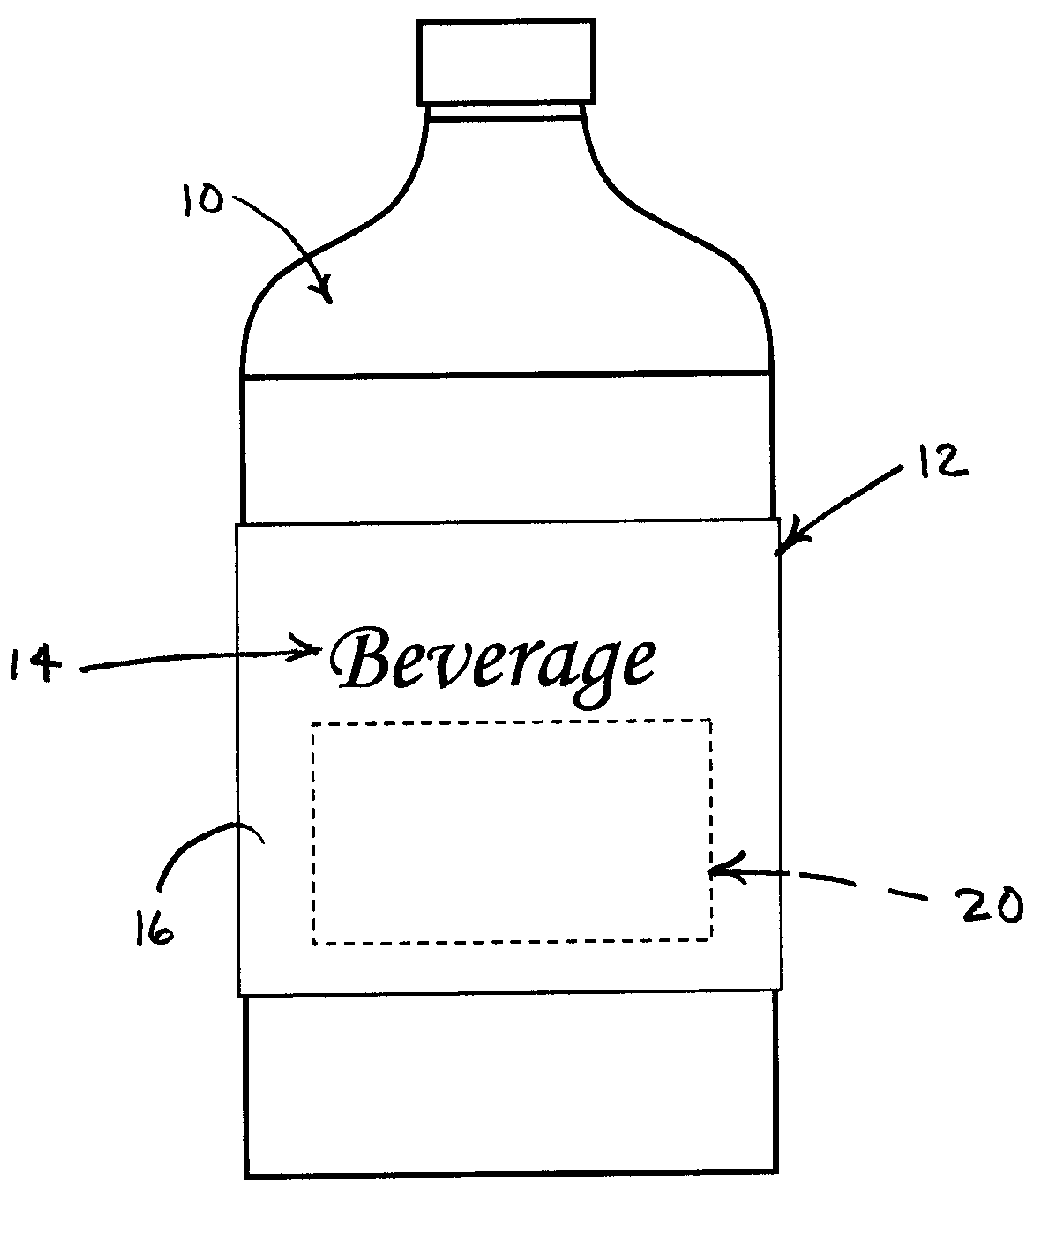 Product Labeling System with Overwrapped Printed Article